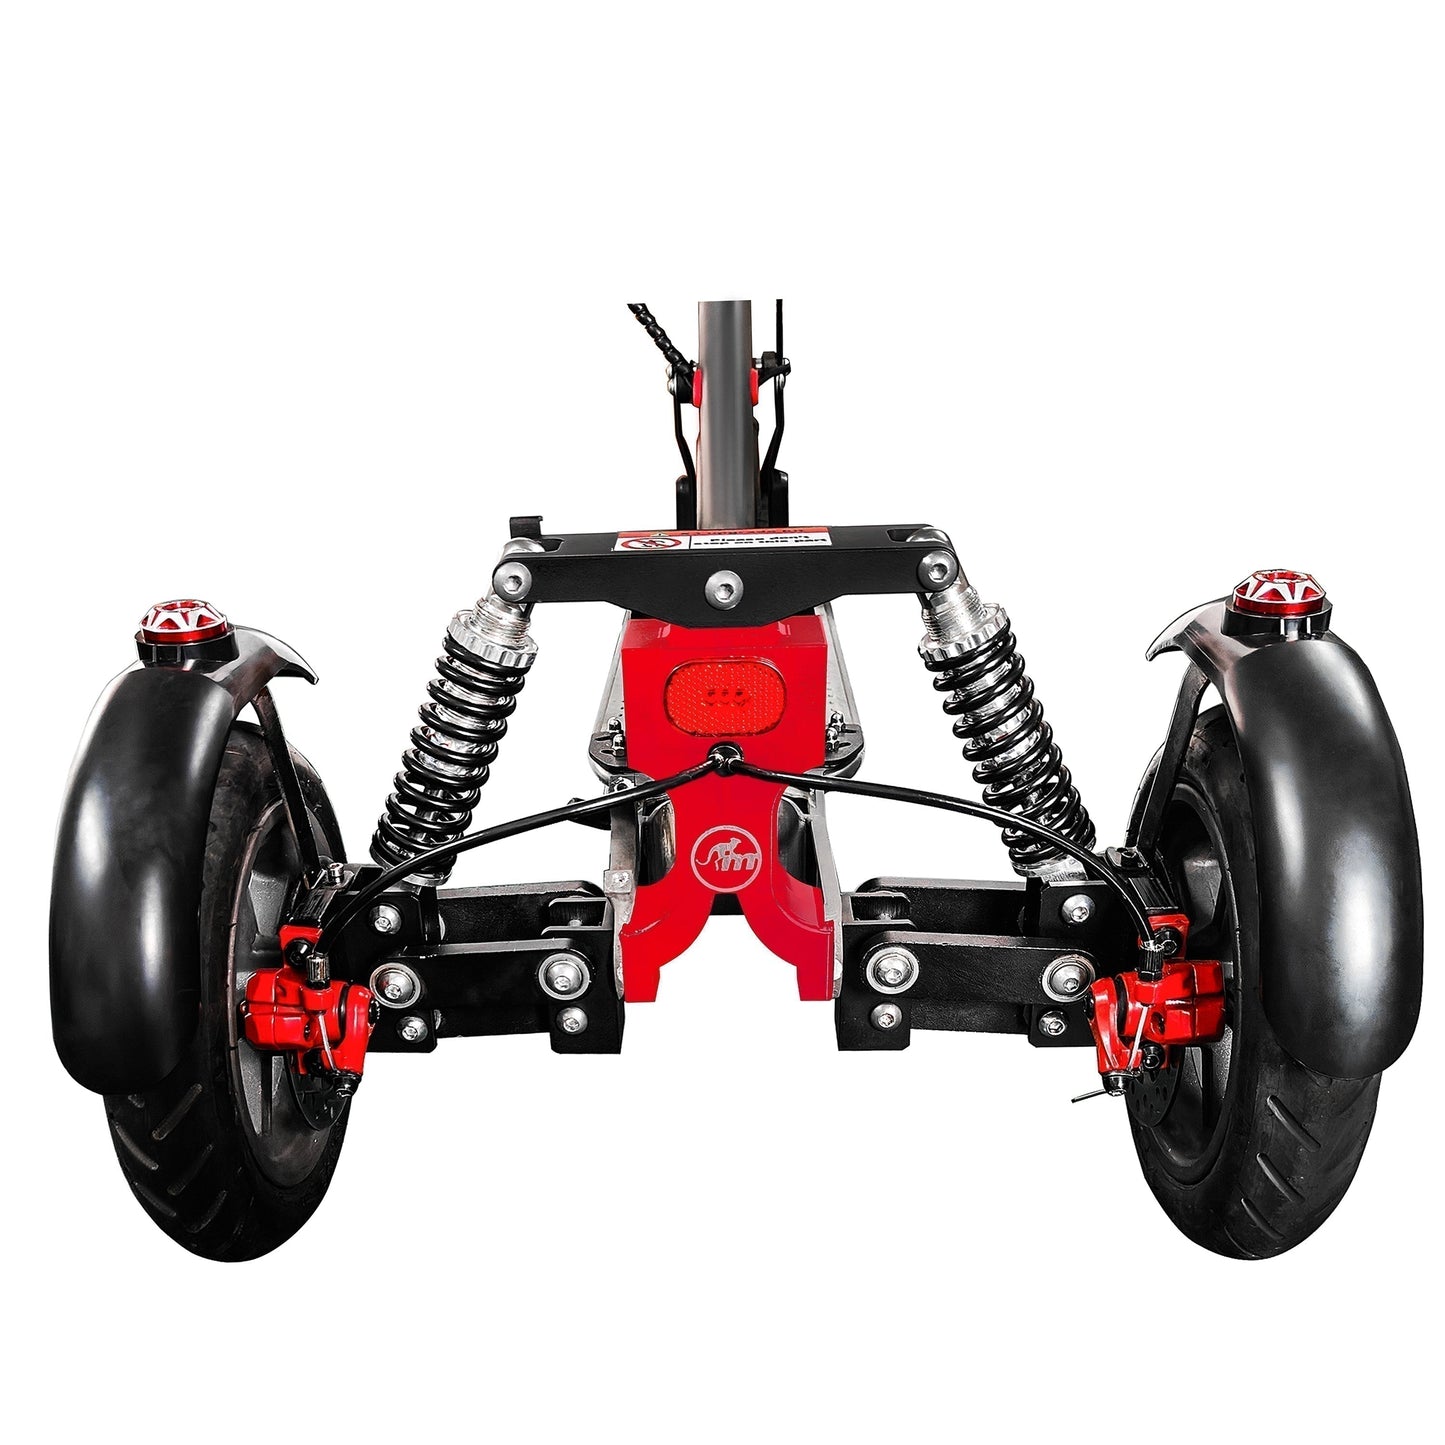 Monorim X3 upgrade kit to be Three wheels special for iscooter i9 frames